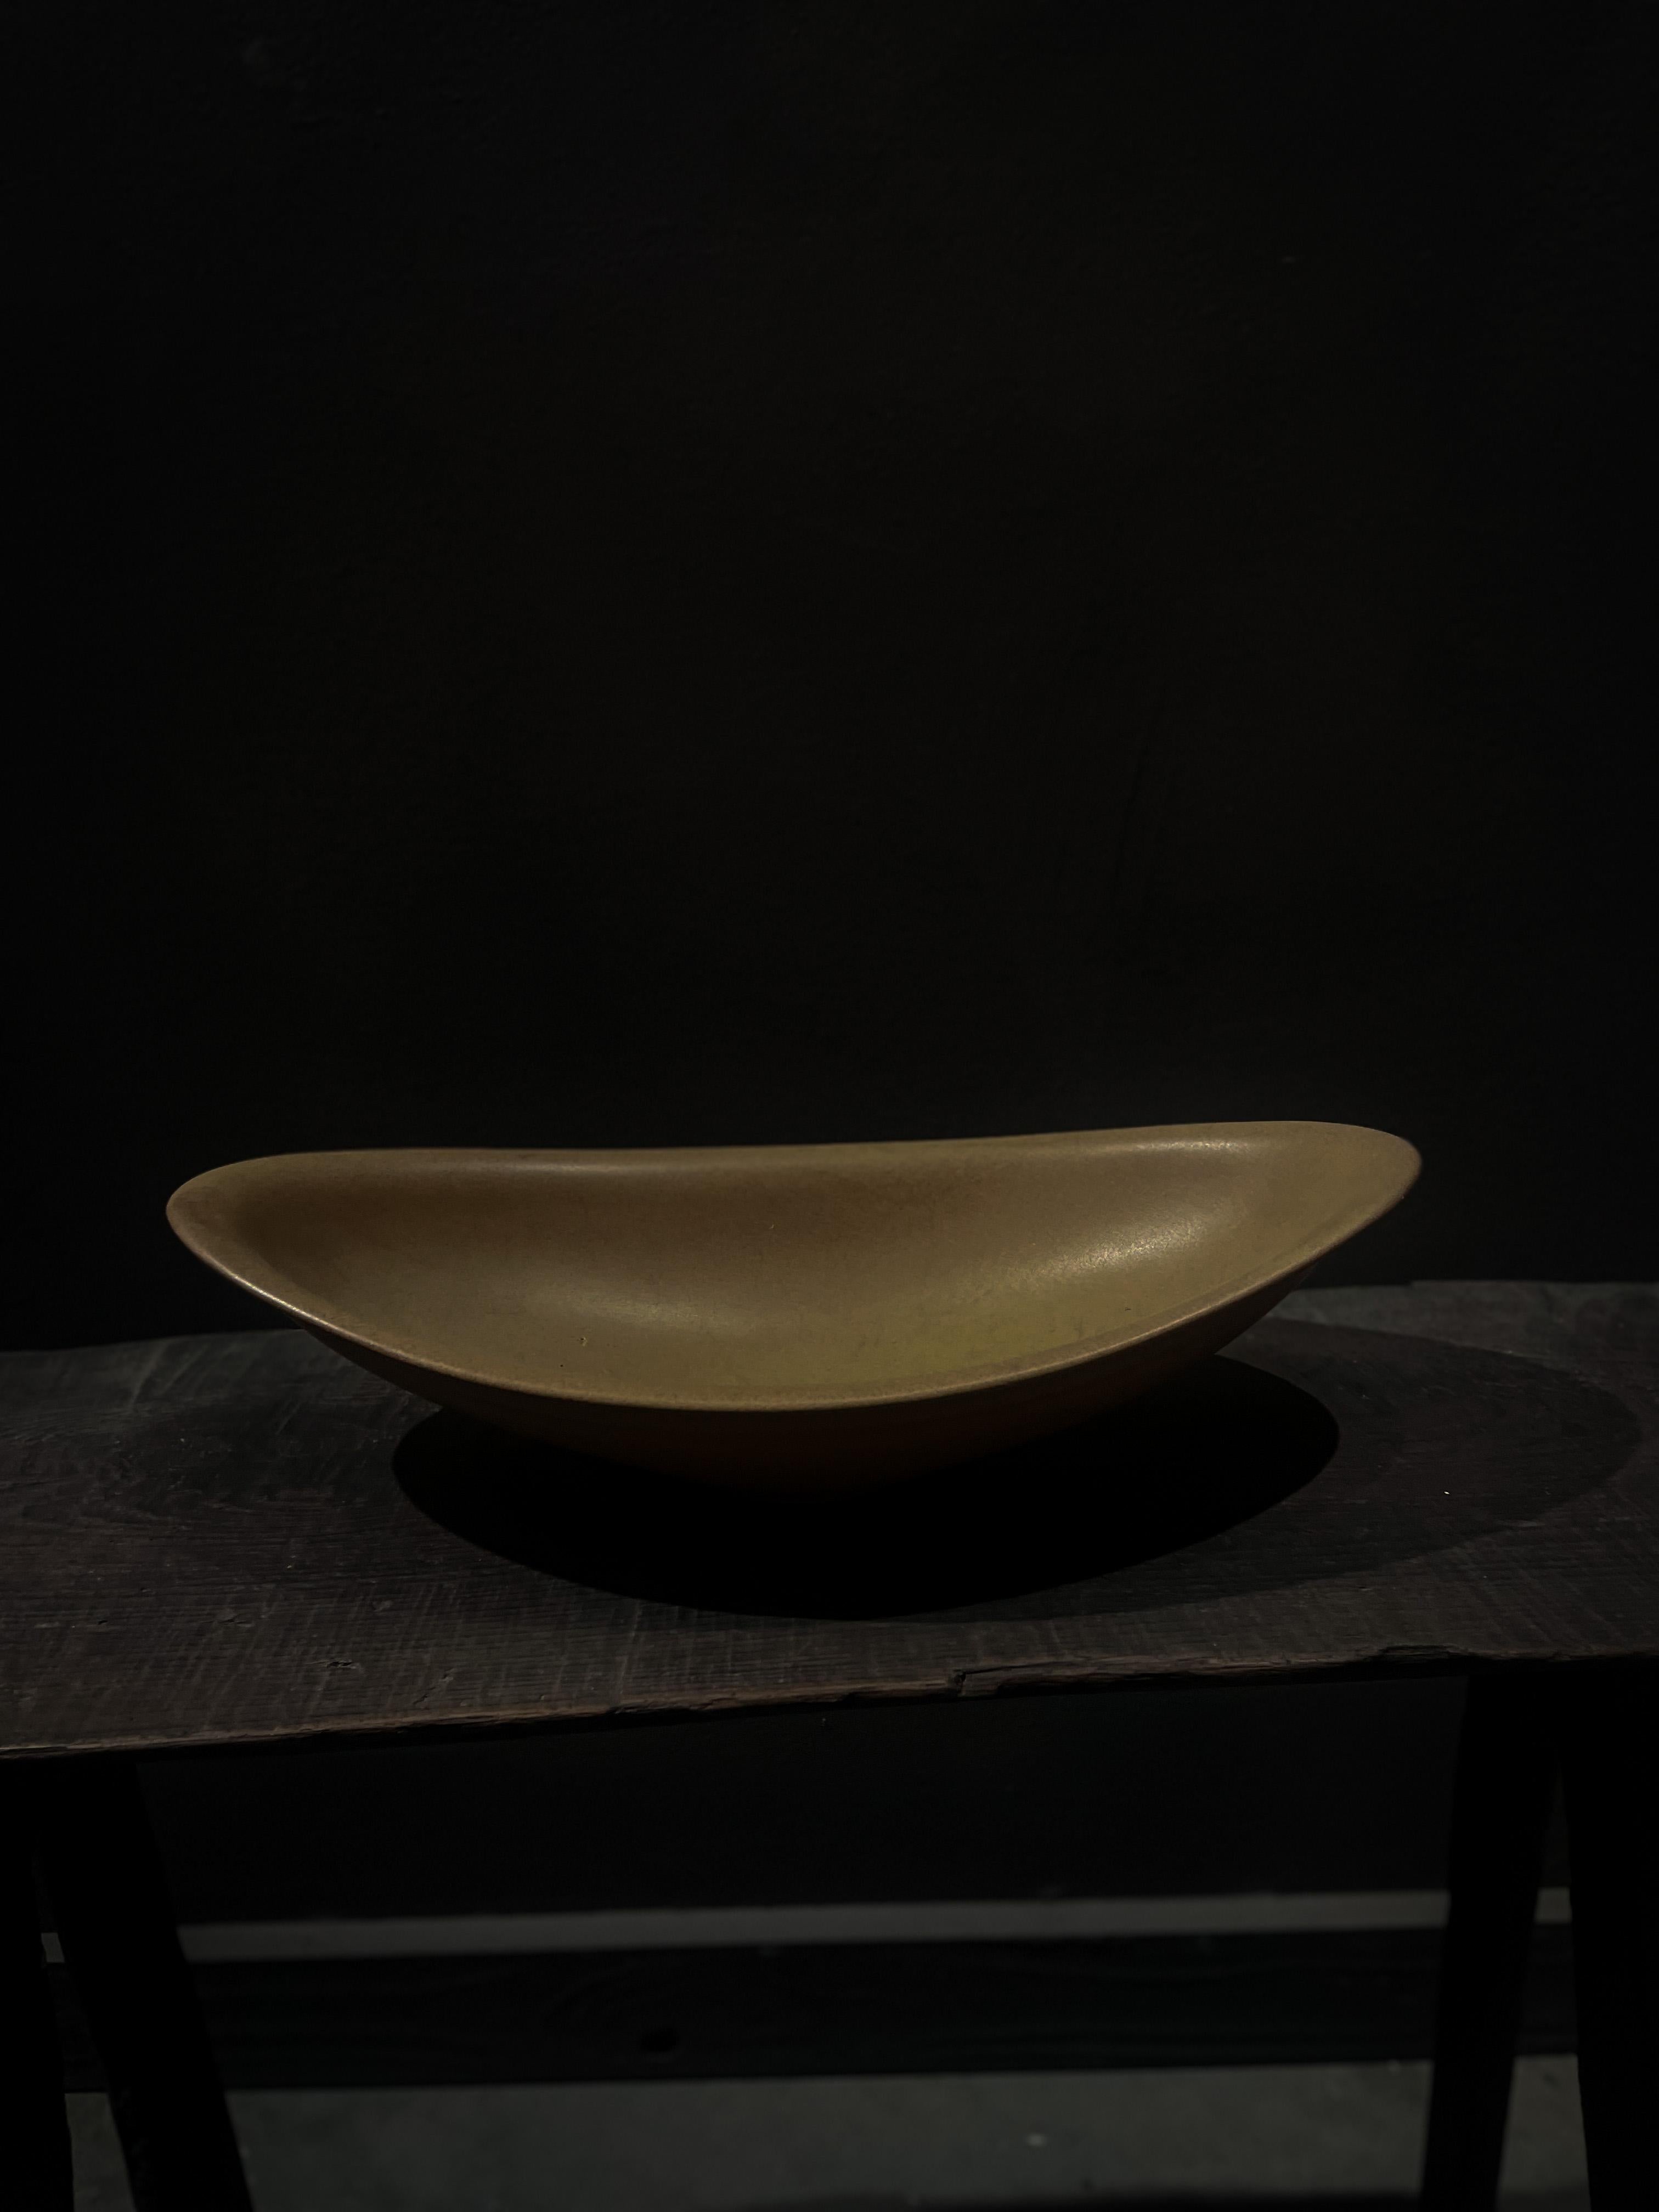 Stunning vintage studio pottery from 1970s/80s. Oblong decorative bowl in dark mustard yellow. 